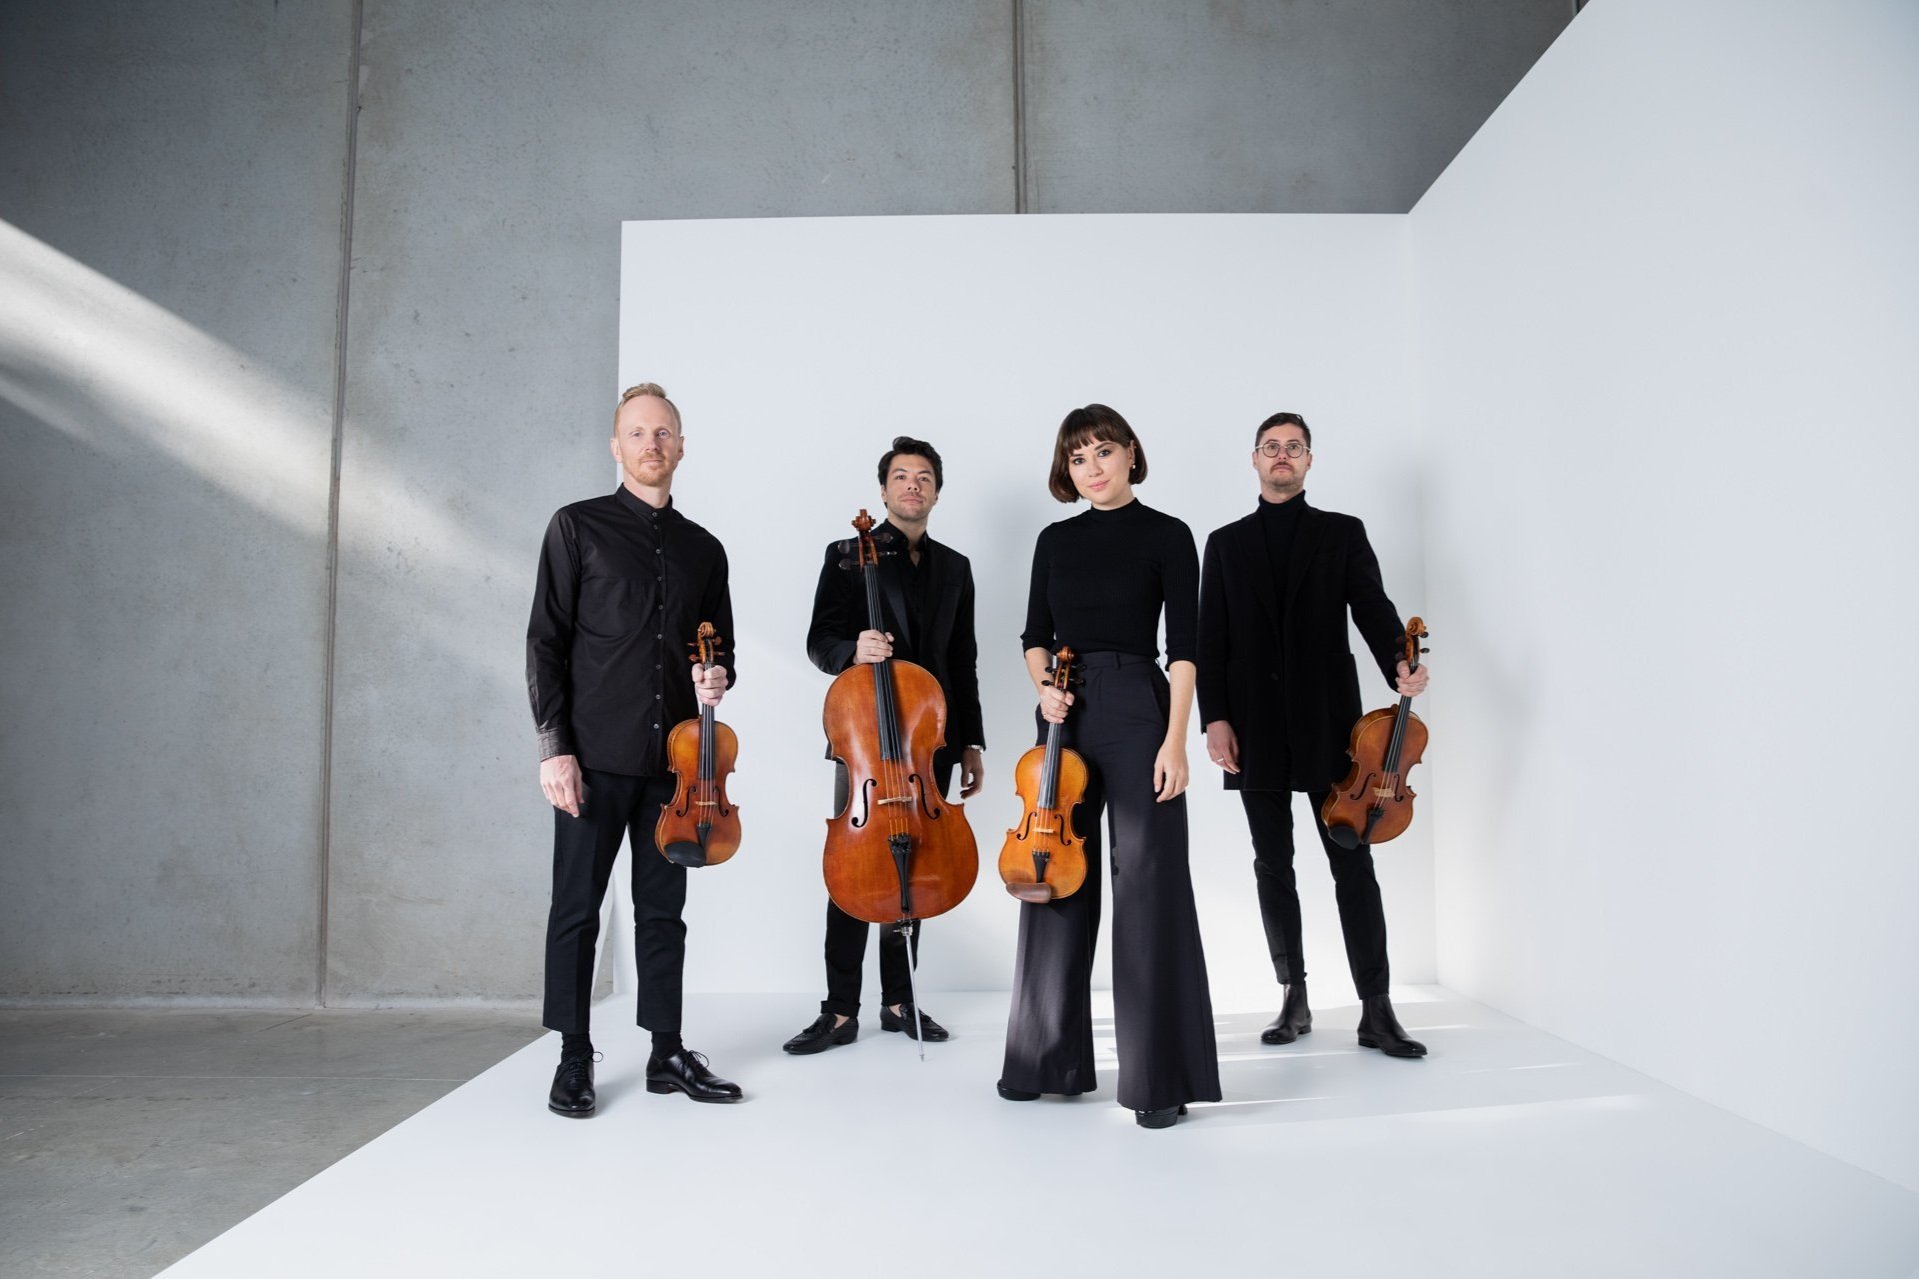 Group Portrait of the Australian String Quartet. Photography by Agatha Yim, Polyphonic Pictures.